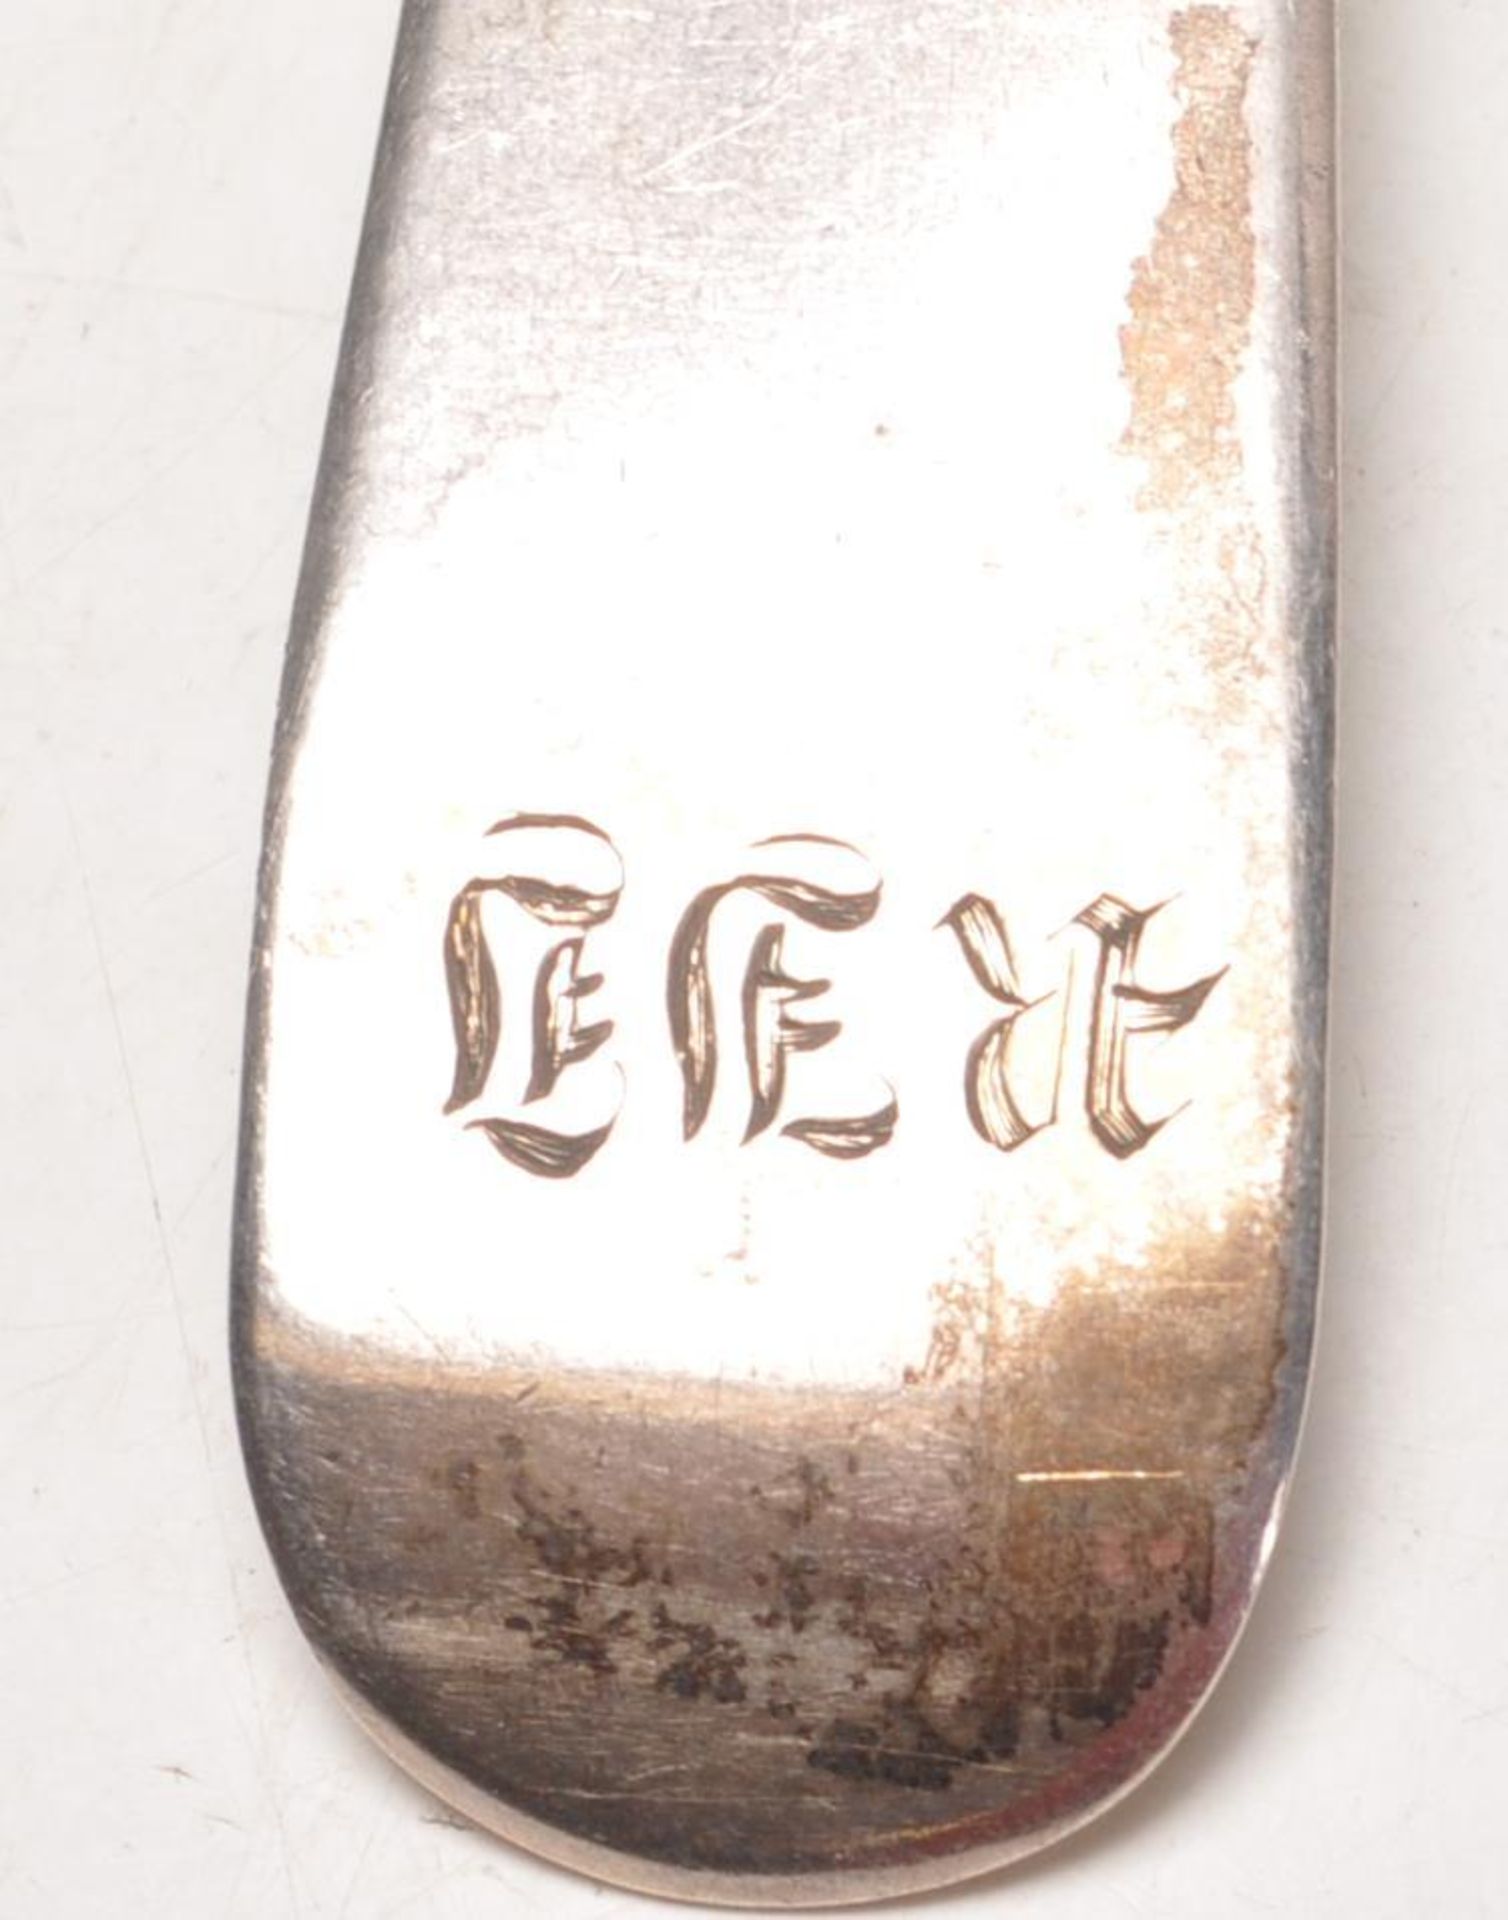 TWO 19TH CENTURY GEORG III SILVER HALLMARKS TABLE SPOON DATED 1819 / 1812 - Image 2 of 6